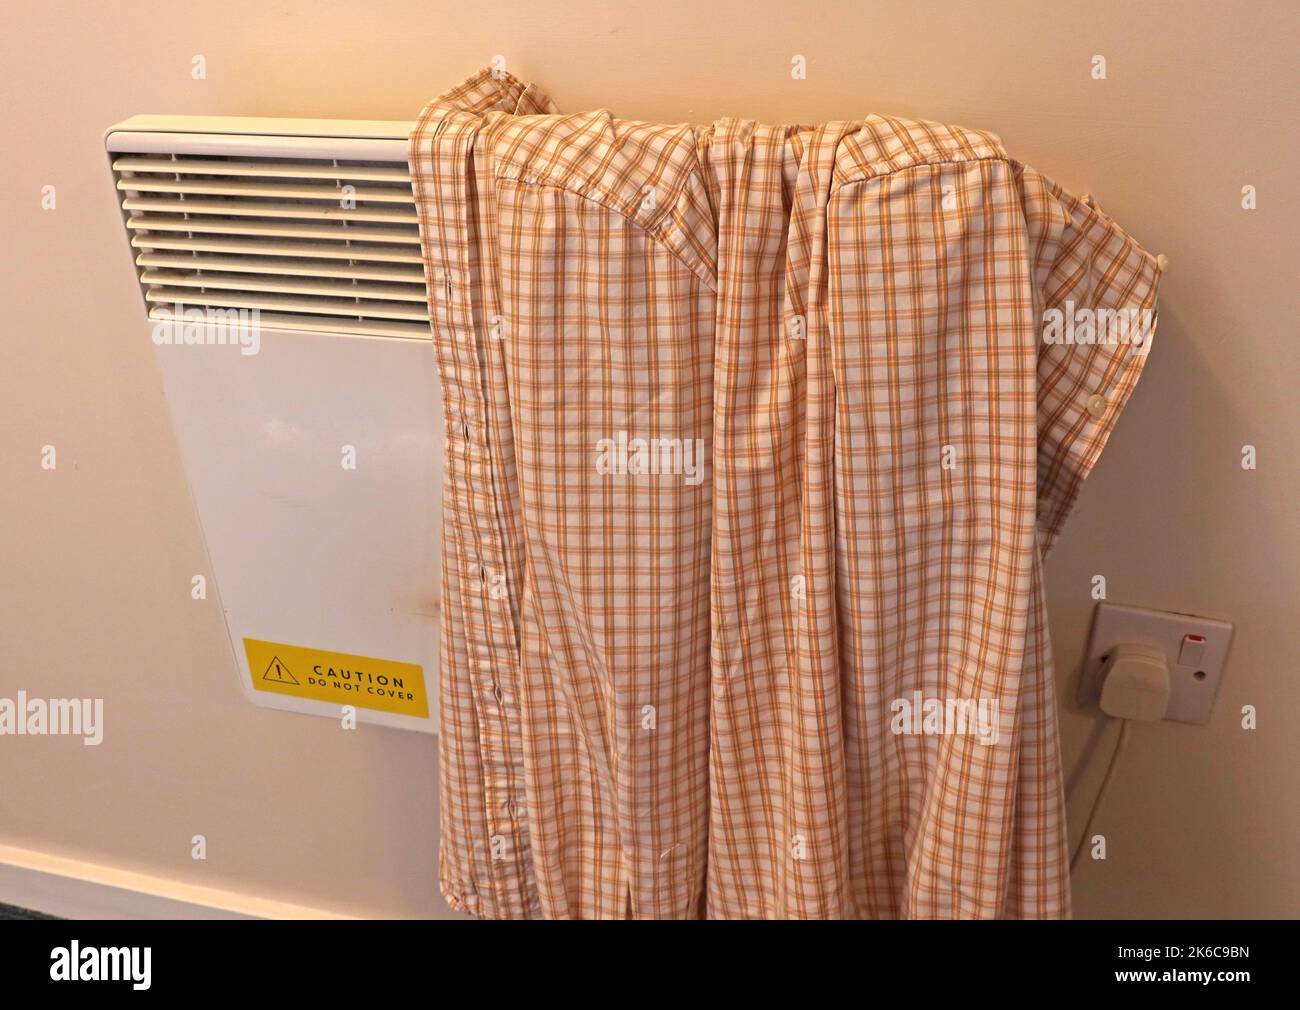 Wall mounted electric space heater, with shirt drying on the top, covering it. Sign 'caution do not cover' Stock Photo